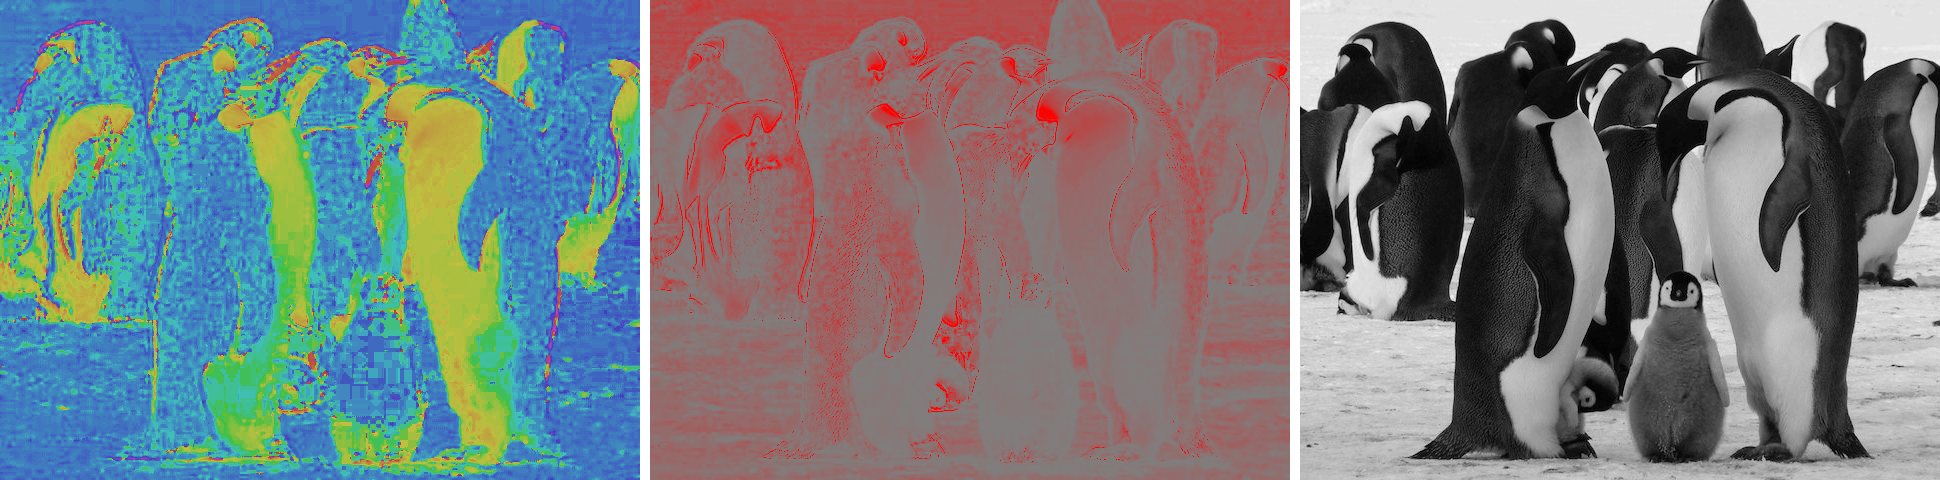 This example separates an image of an adorable penguin family into the Hue, Saturation, and Lightness channels. The Hue channel reveals that the penguins' bellies and necks consist of yellow-green hues, while their backs exhibit blue tones. The Saturation channel indicates that the highest saturation is found in the penguins' cheeks. The Lightness channel shows the extent to which the lighter areas of the bellies differ from the darker areas of their backs. (Source: Pexels.)